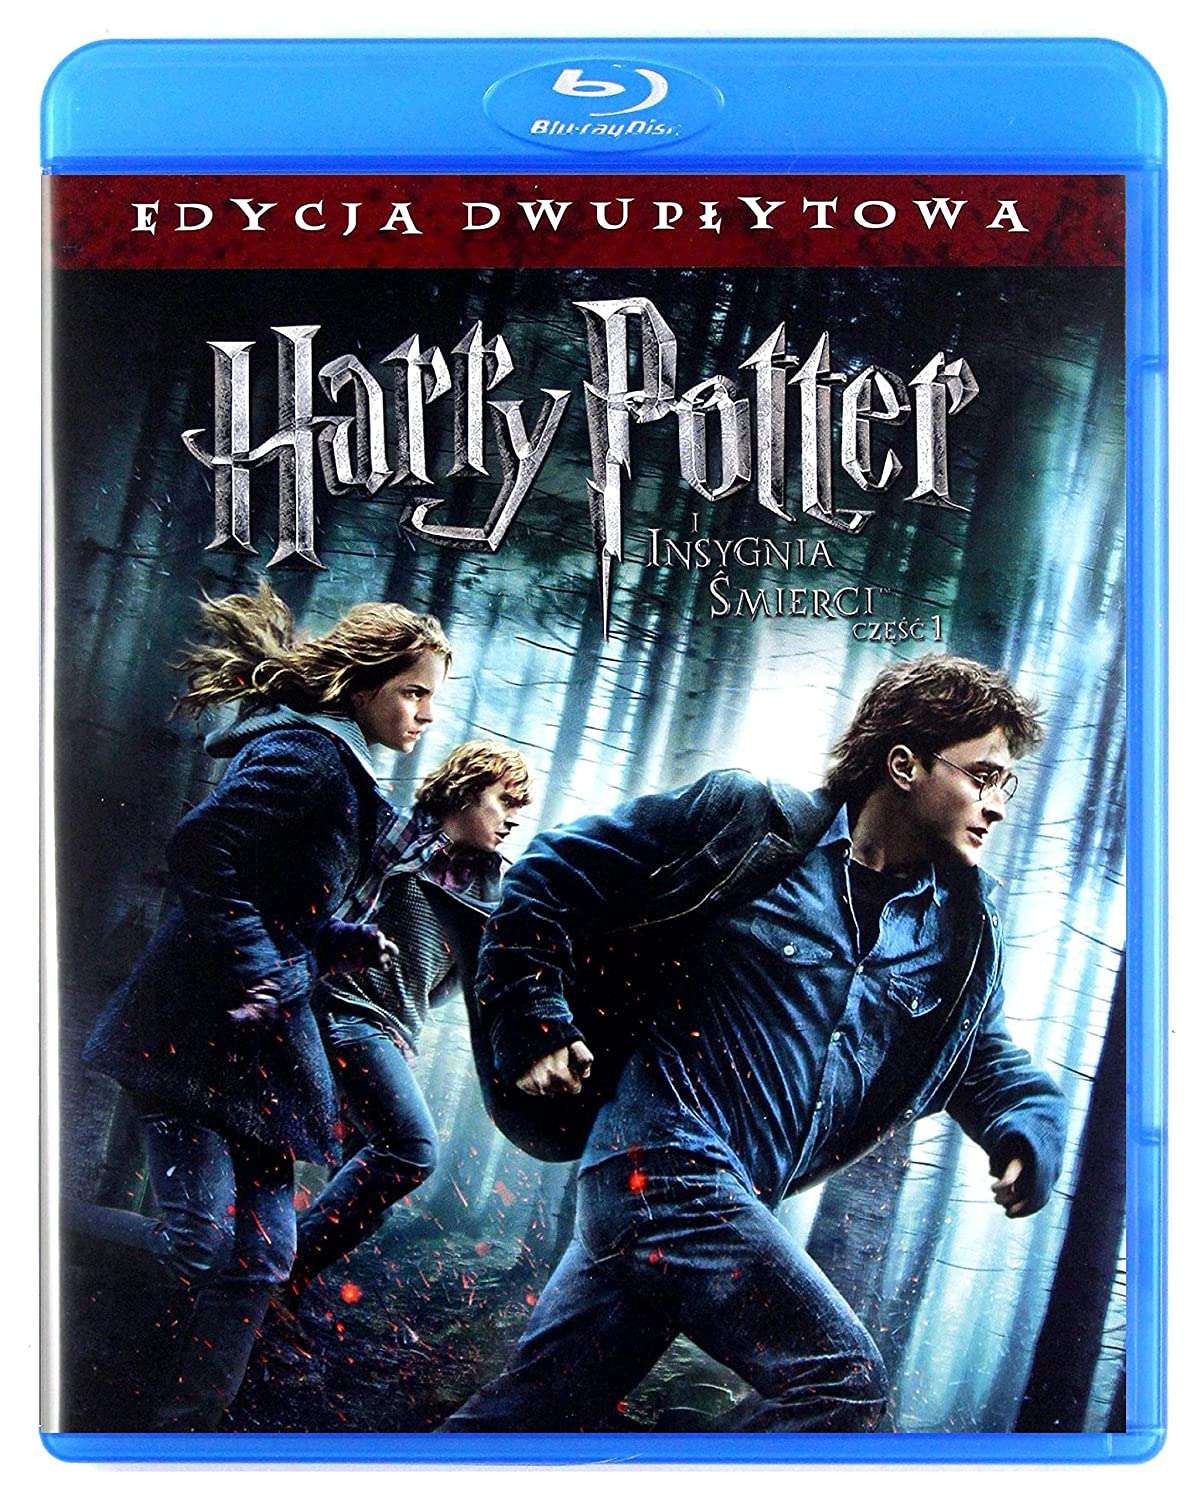 Amazon.com: Harry Potter and the Deathly Hallows: Part I ...